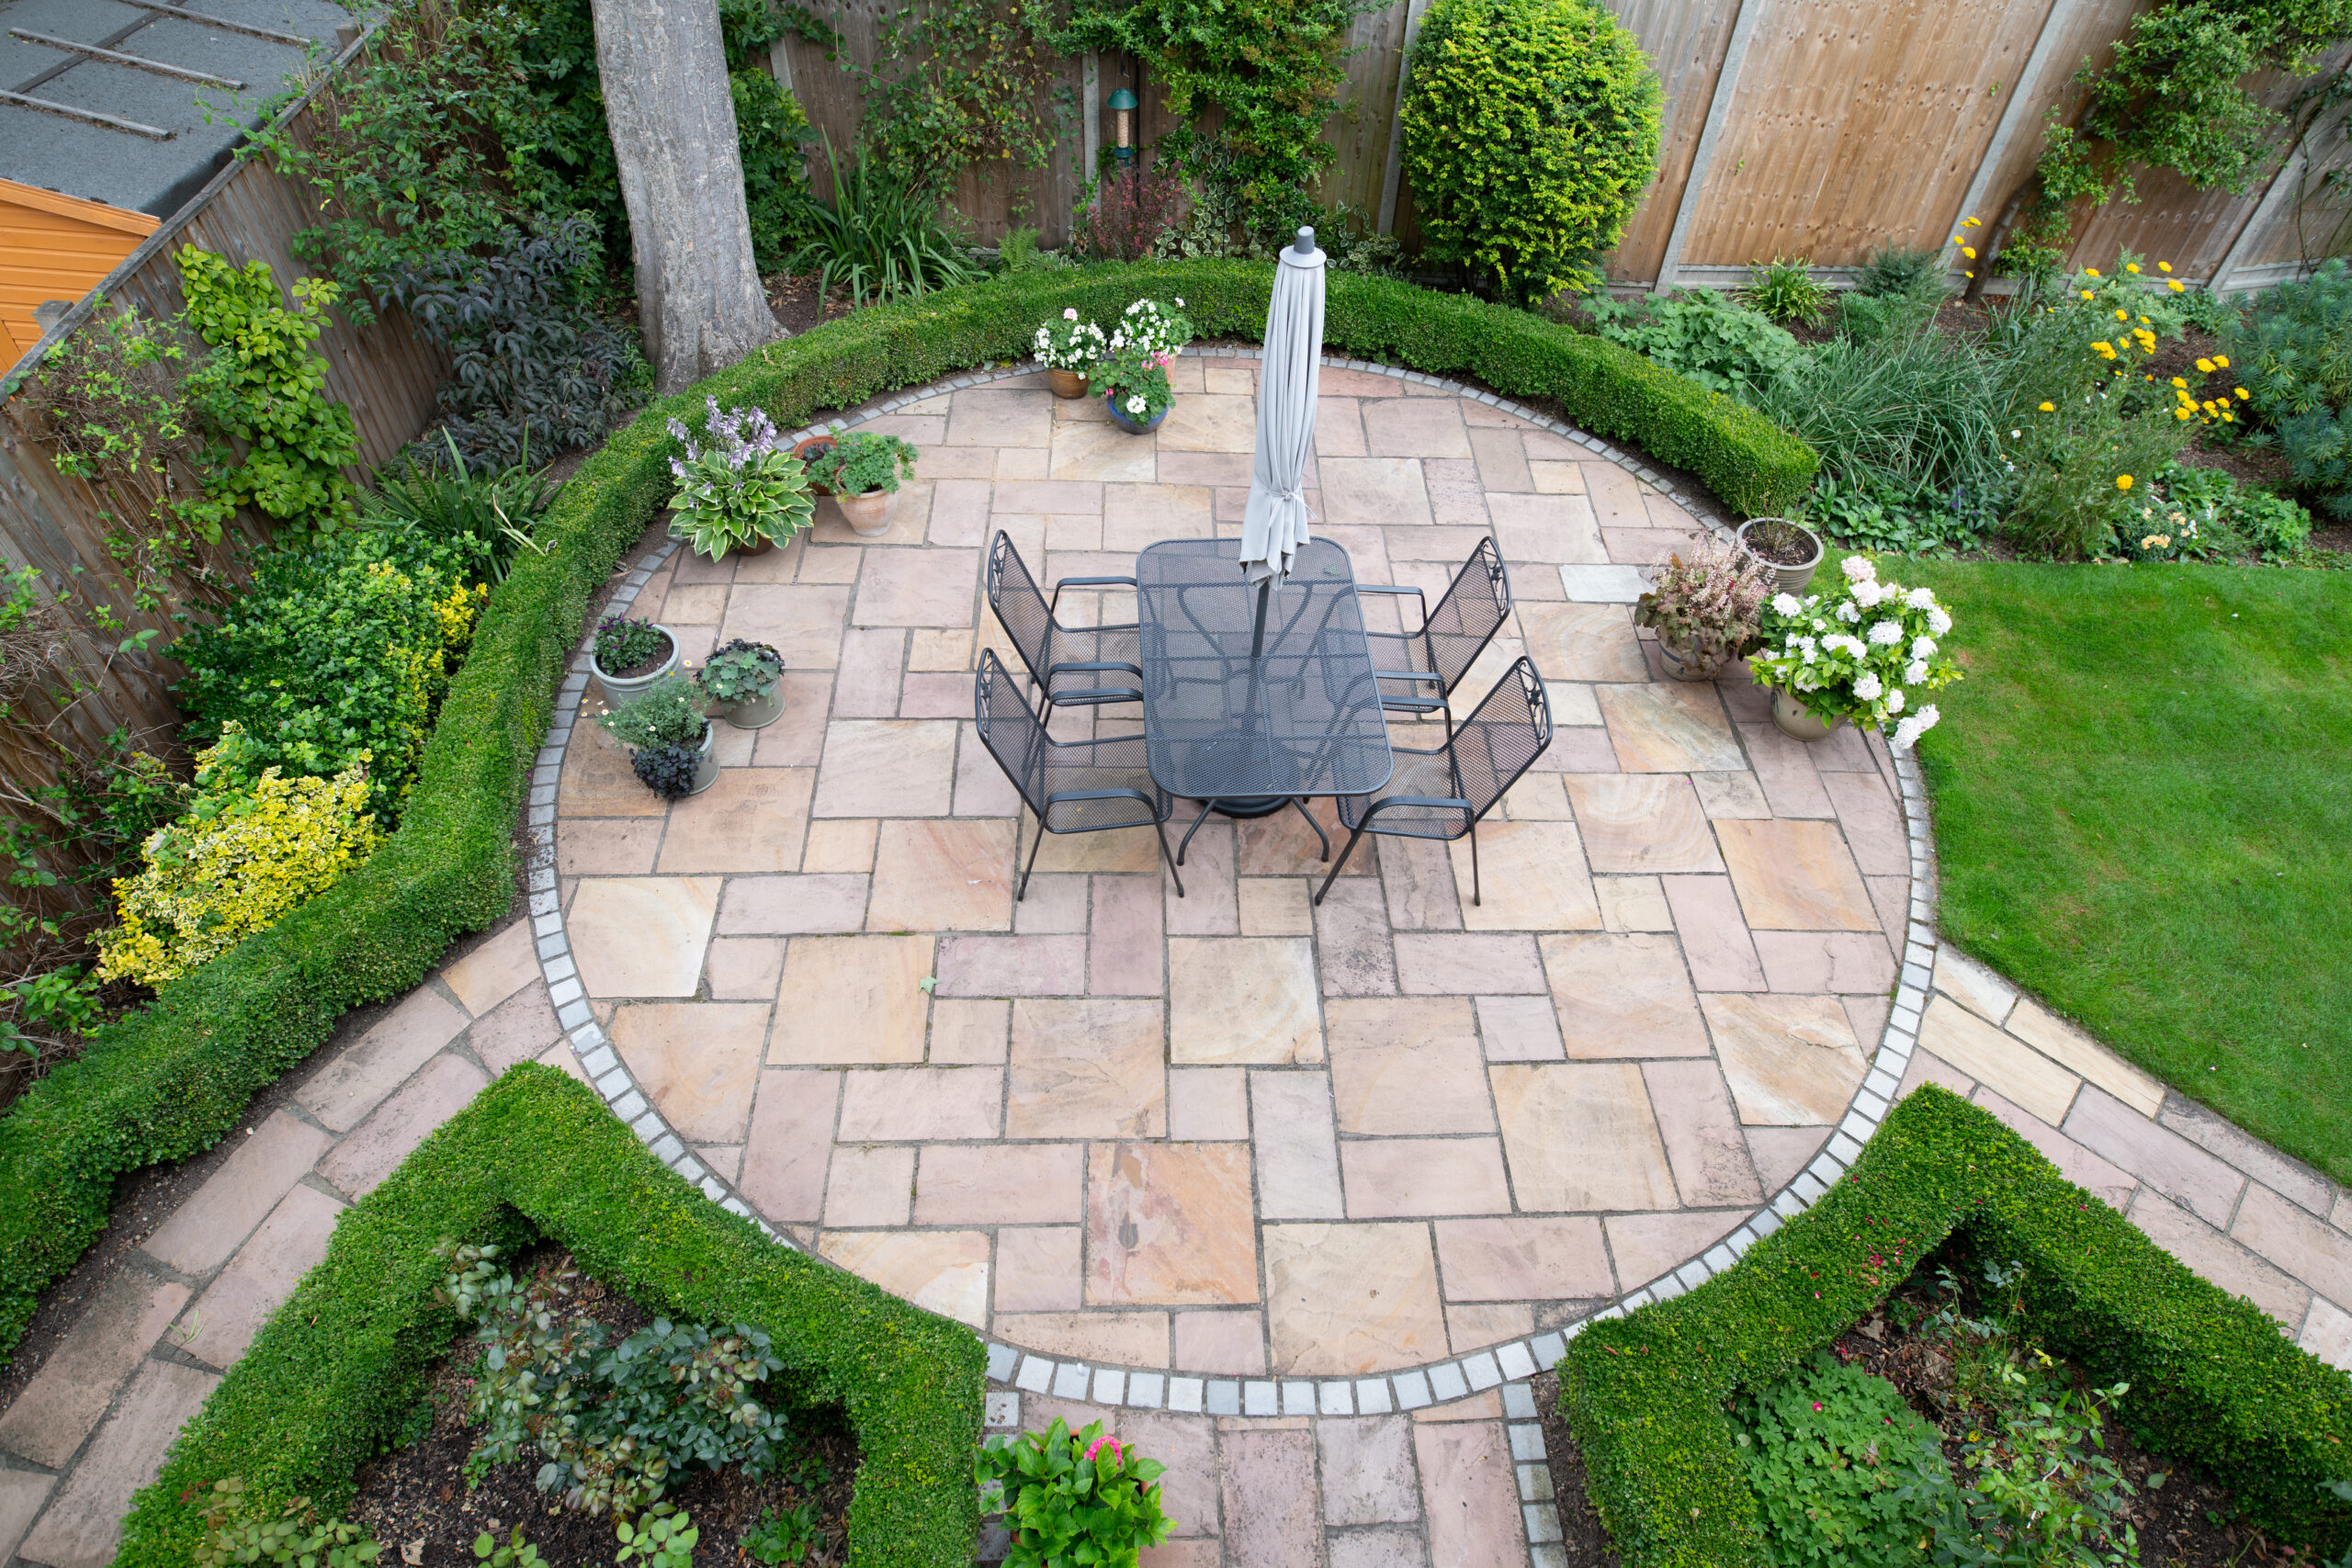 Circular,Garden,Patio,With,Freshly,Jet,Washed,Paving,Stones